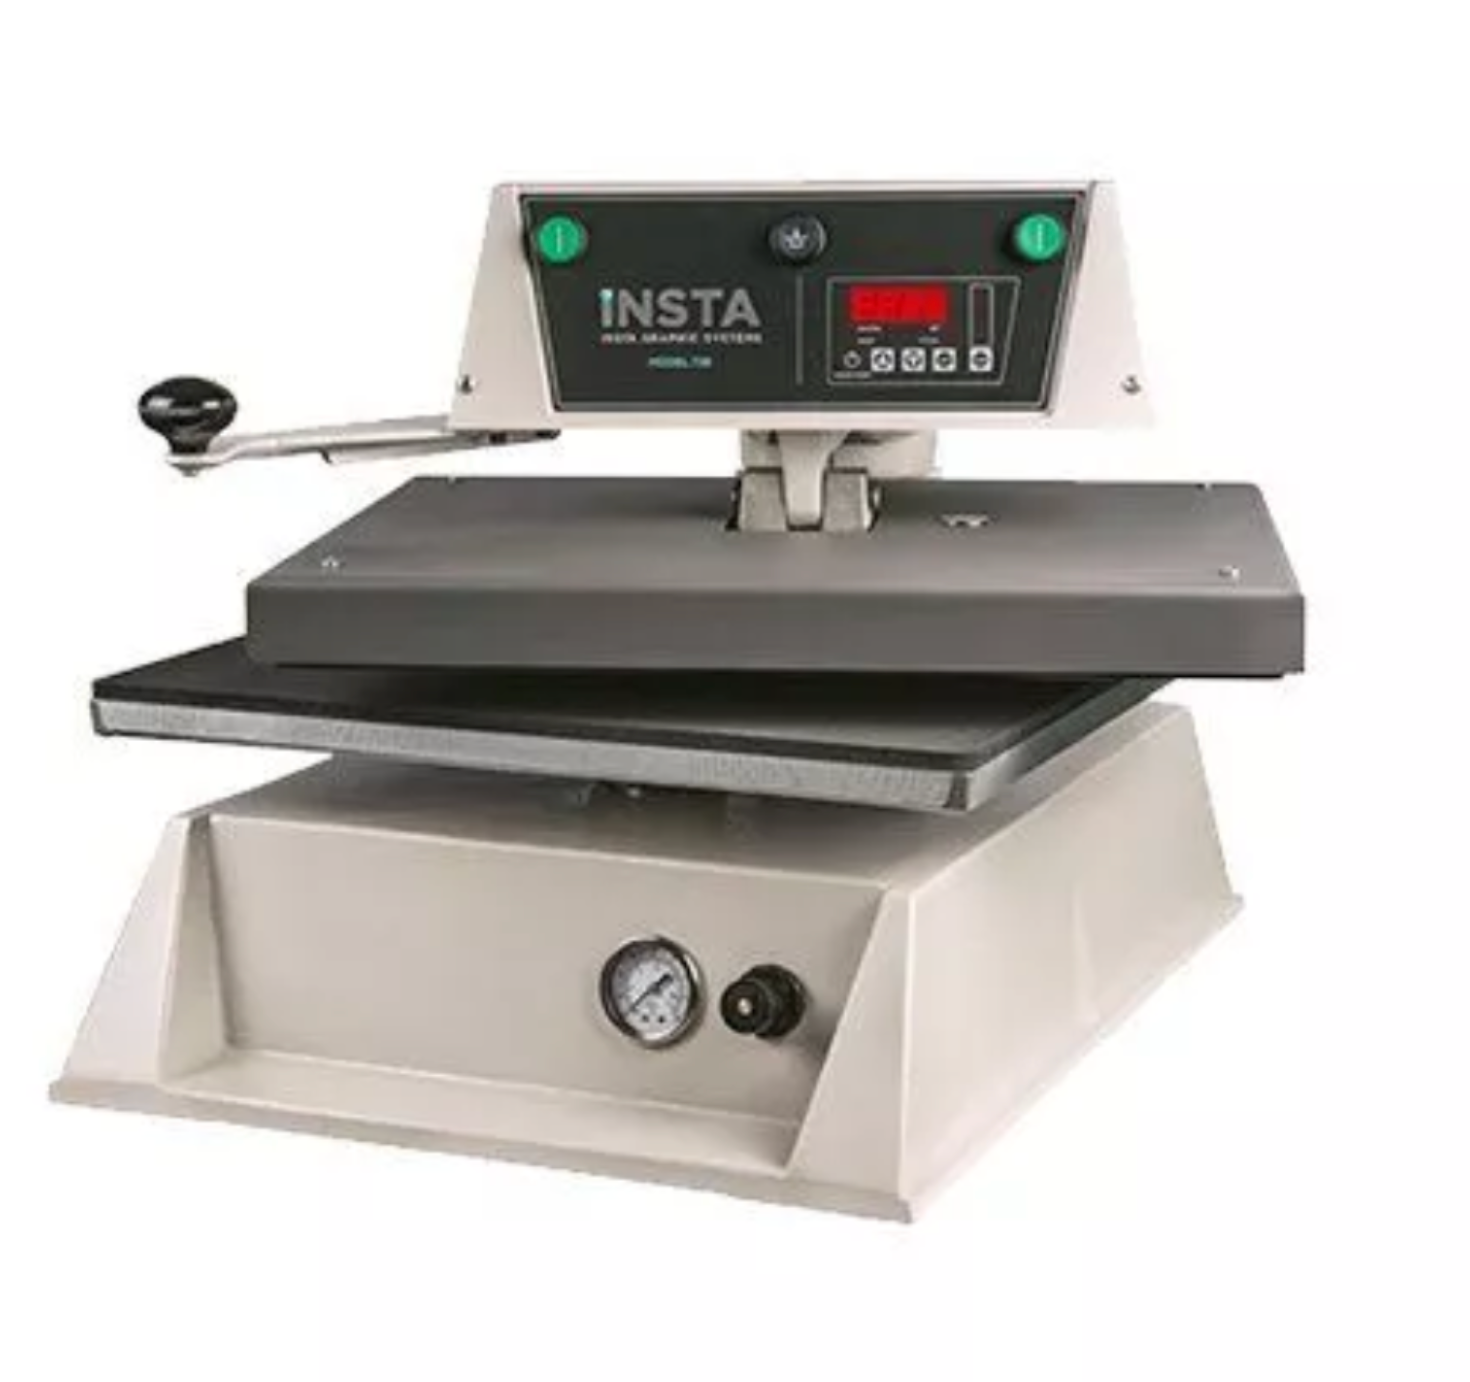 Insta Graphic Systems 728 Heat Press Machine – The Answer to Your Increasing Production Demands | Insta Graphic Systems